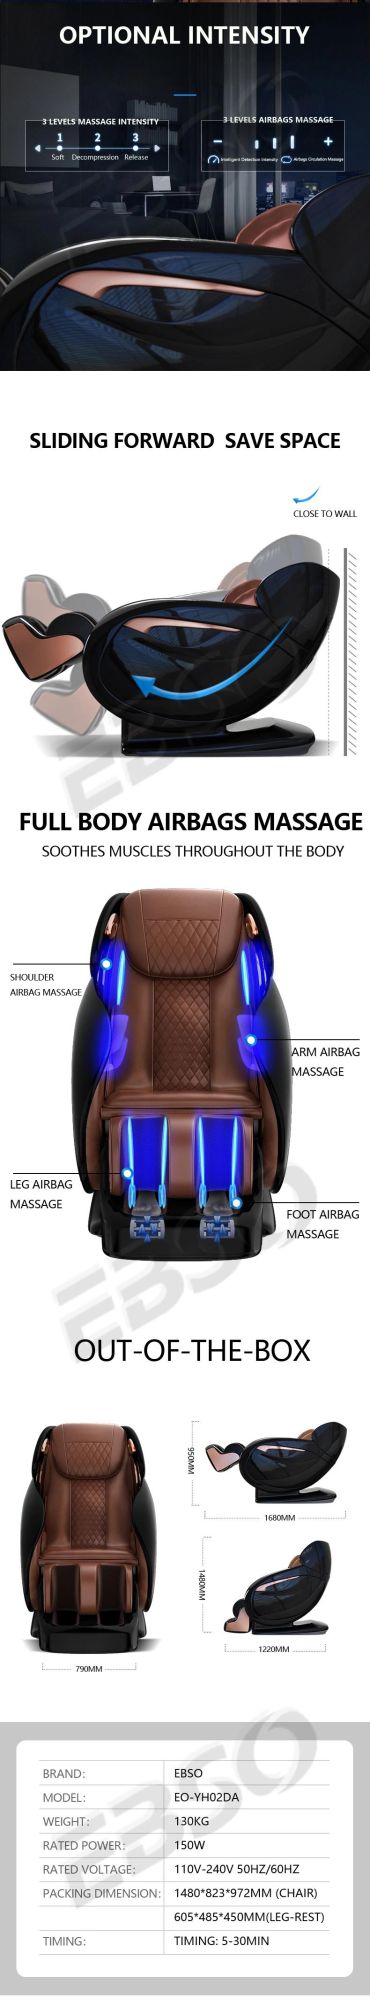 Air Pressure Massage Luxury Commercial Full Body Massage Chair 4D Massage Equipment China